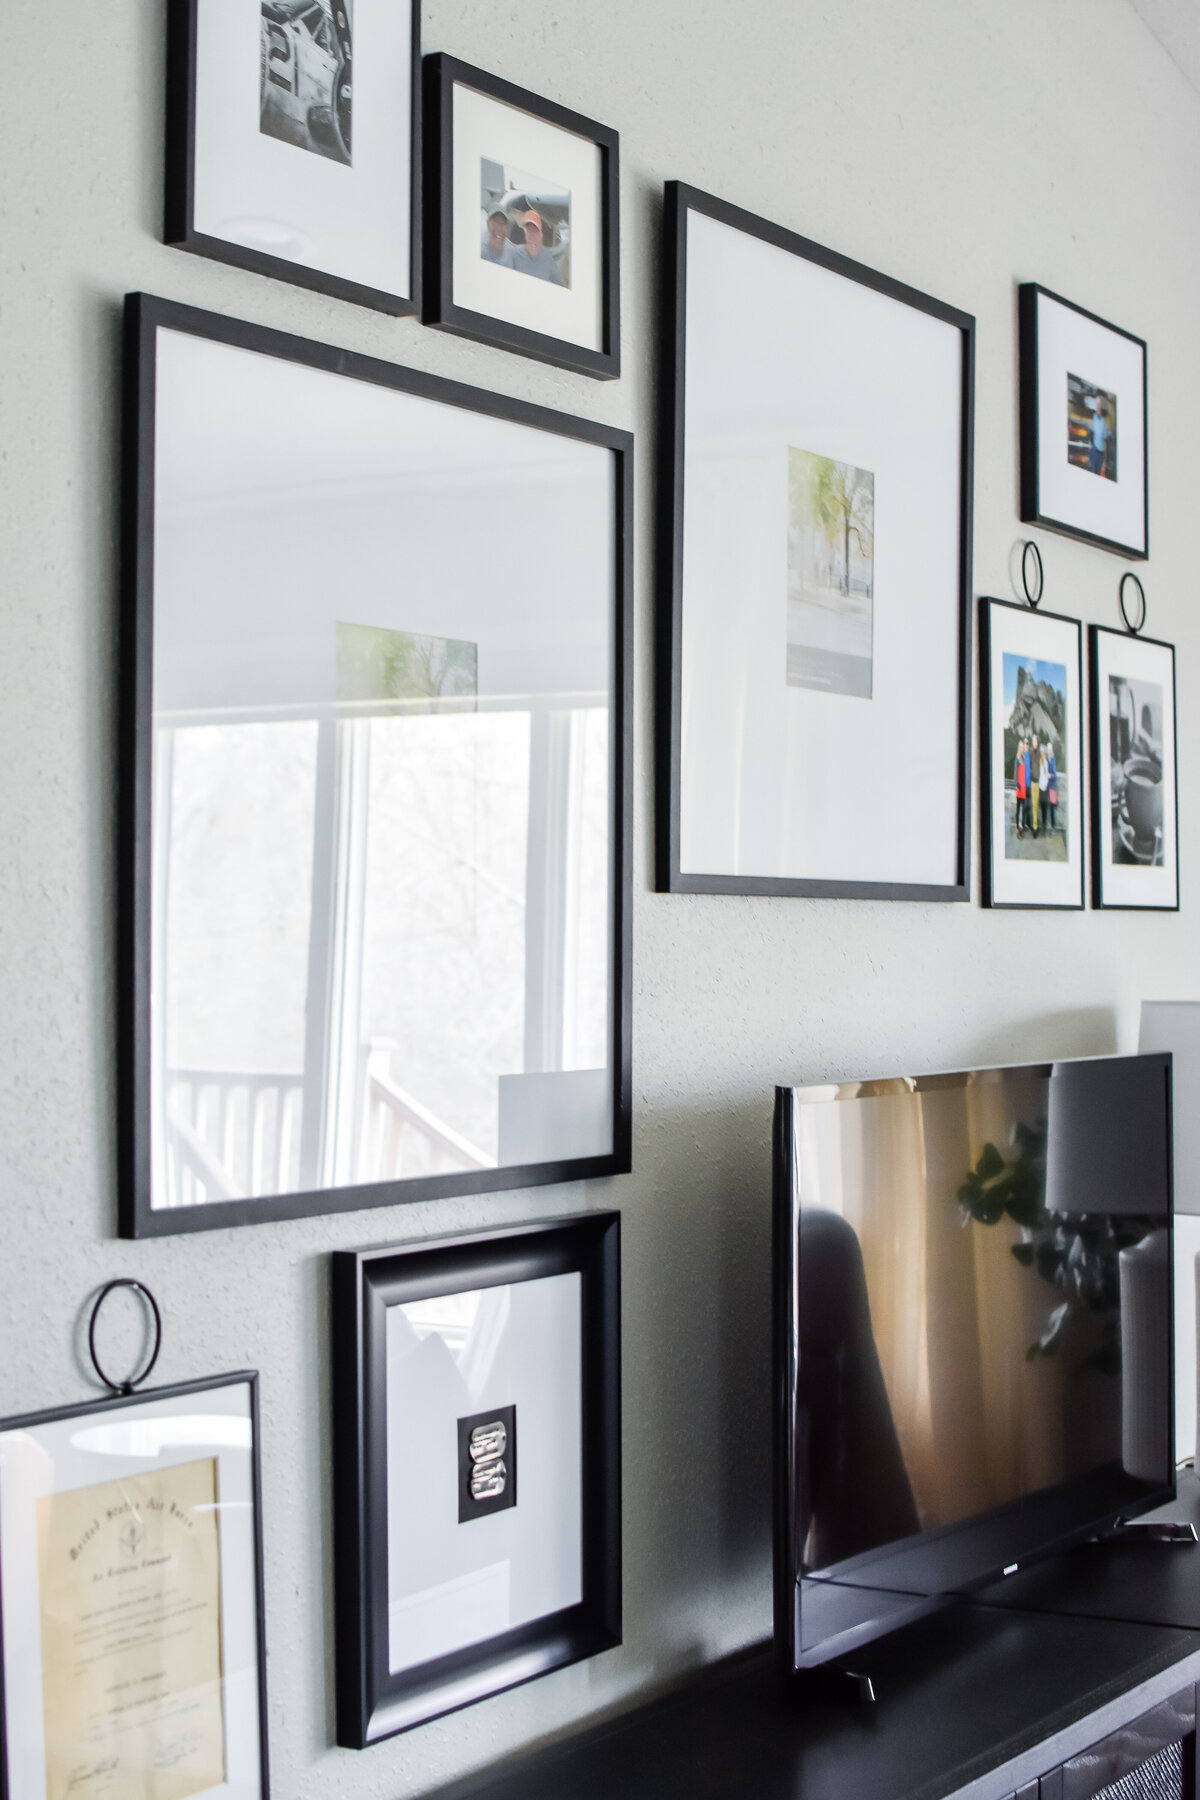 Several photos in black frames hung on the wall behind a TV console